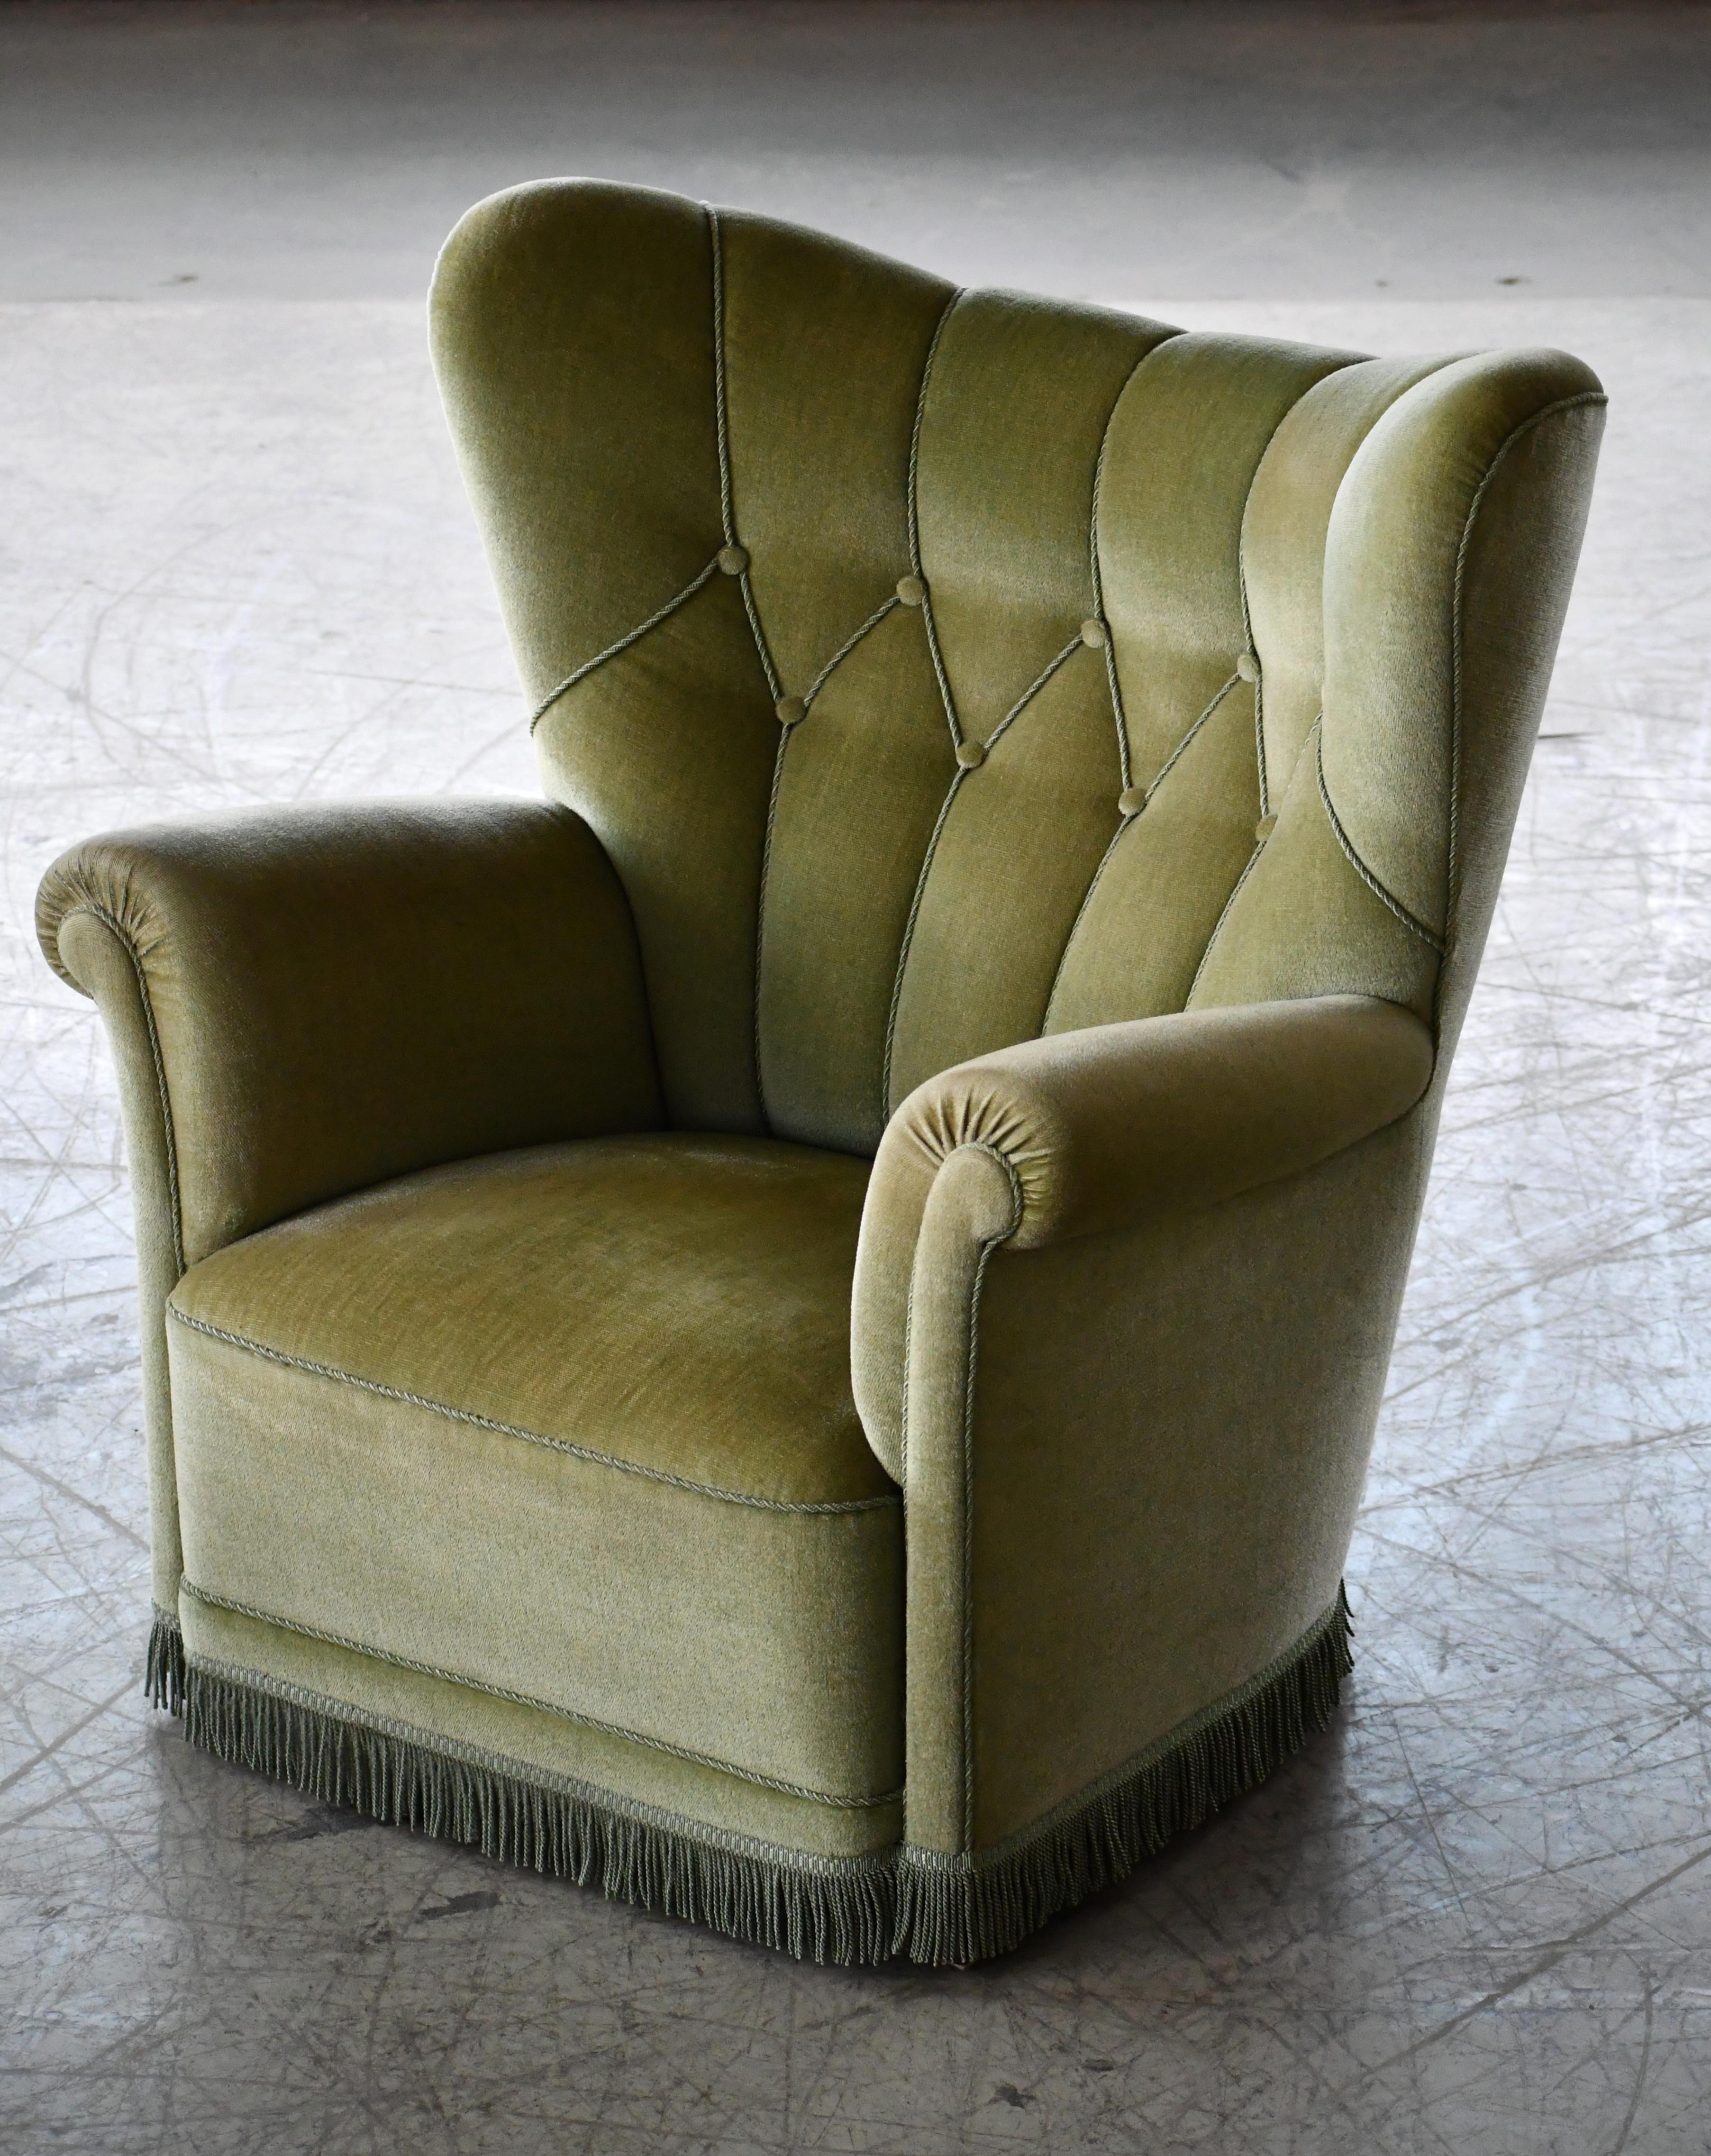 Danish Mid-Century Lounge or Club Chair in Green Mohair, 1940's For Sale 7